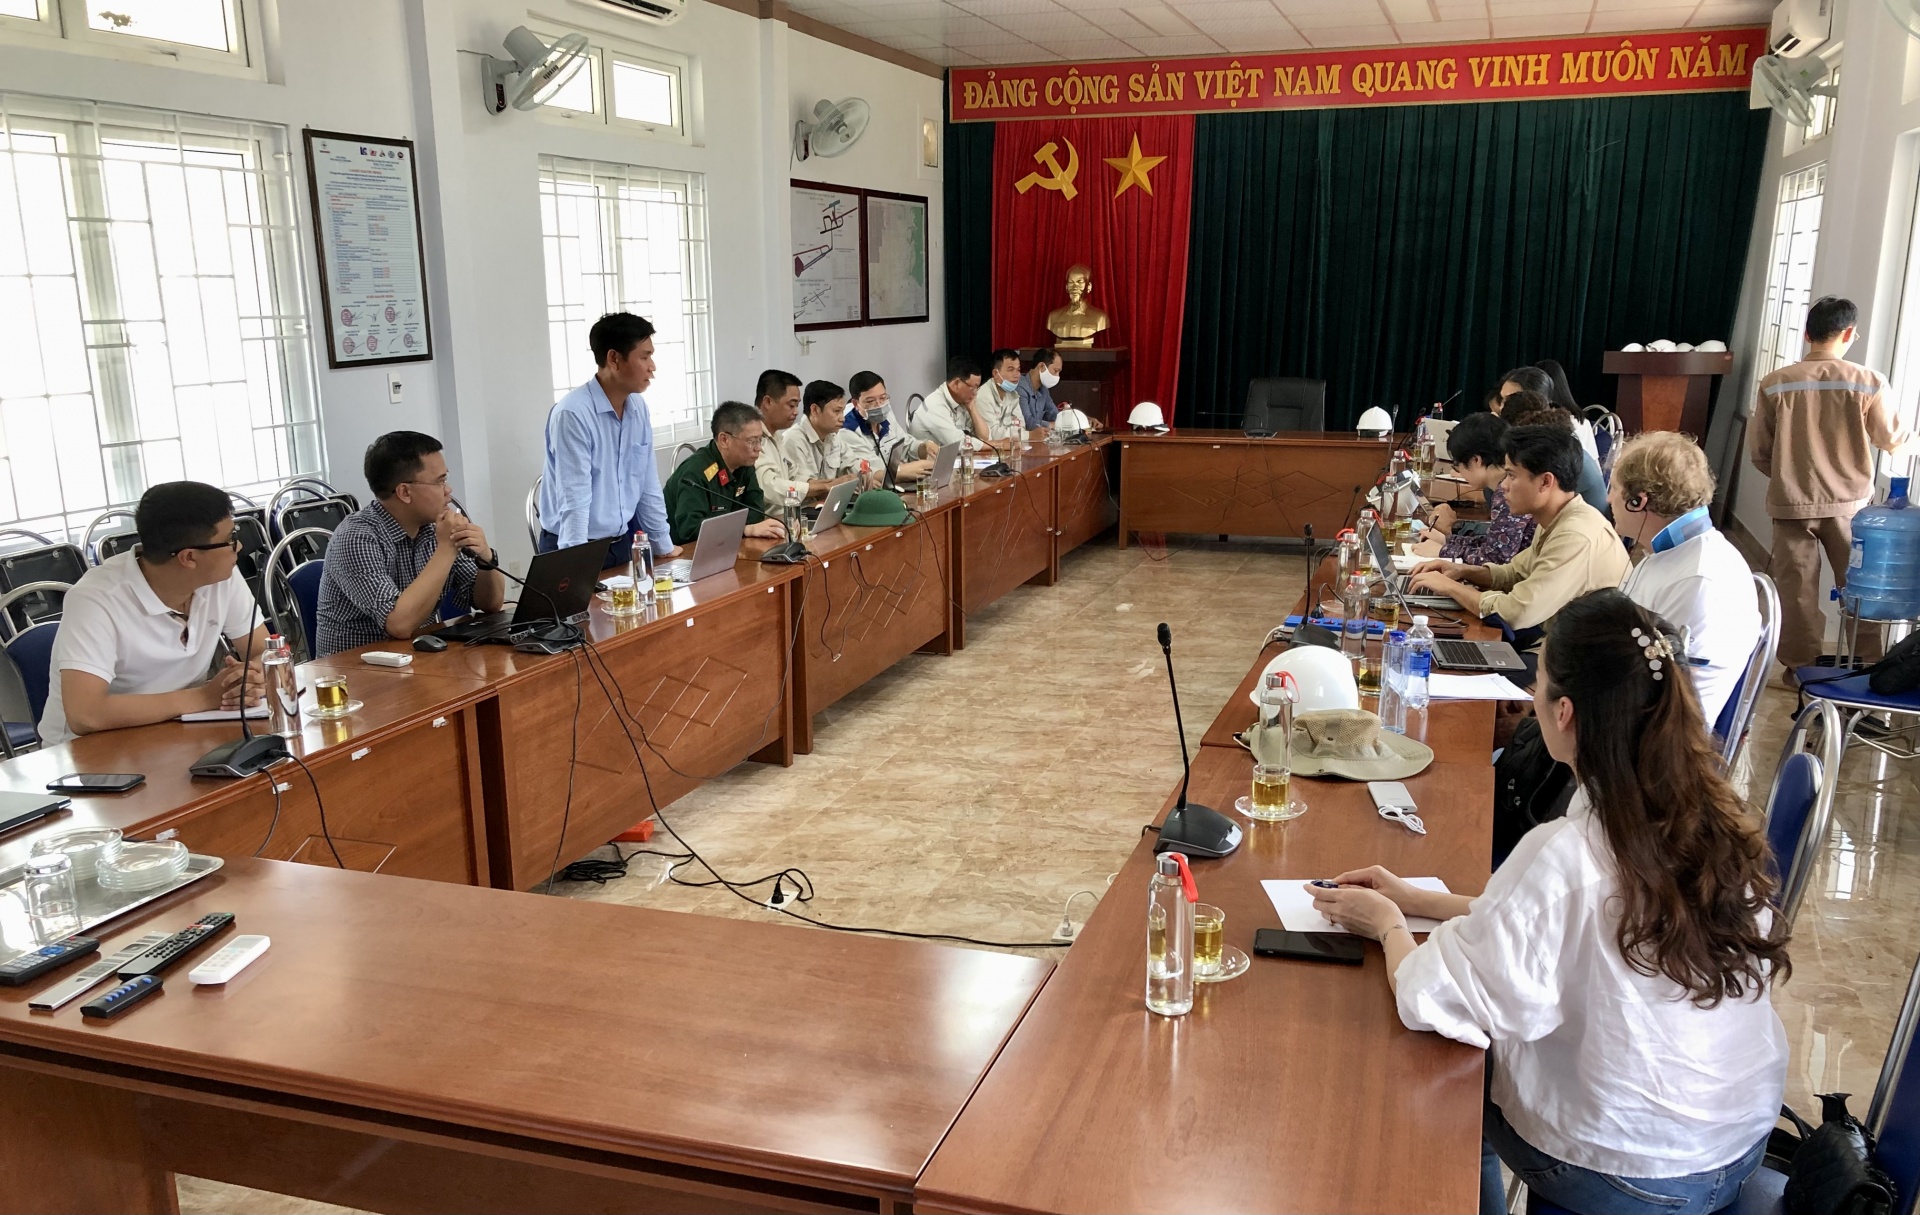 Promoting international collaboration for sustainable development of hydropower projects in Vietnam